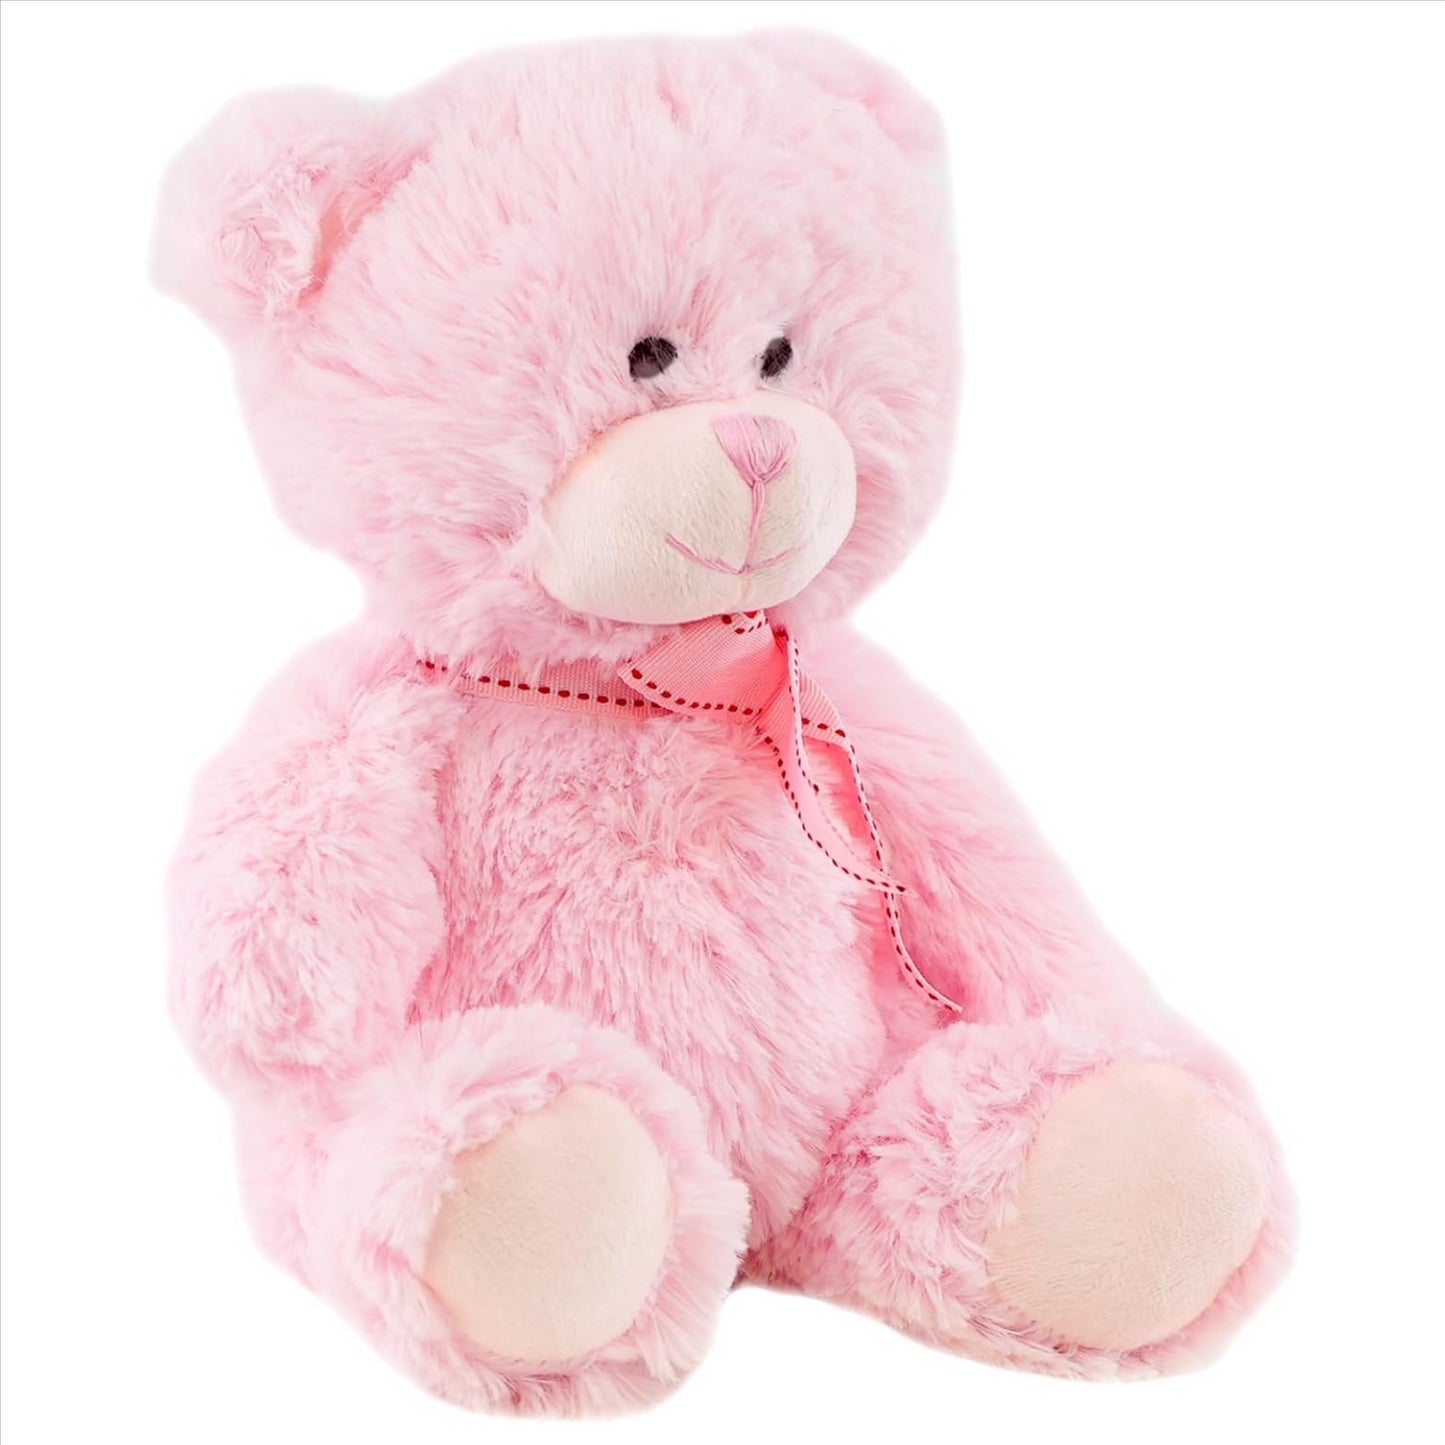 Plush Teddy Bear Soft Toy with Ribbon (Pink) by The Magic Toy Shop - UKBuyZone